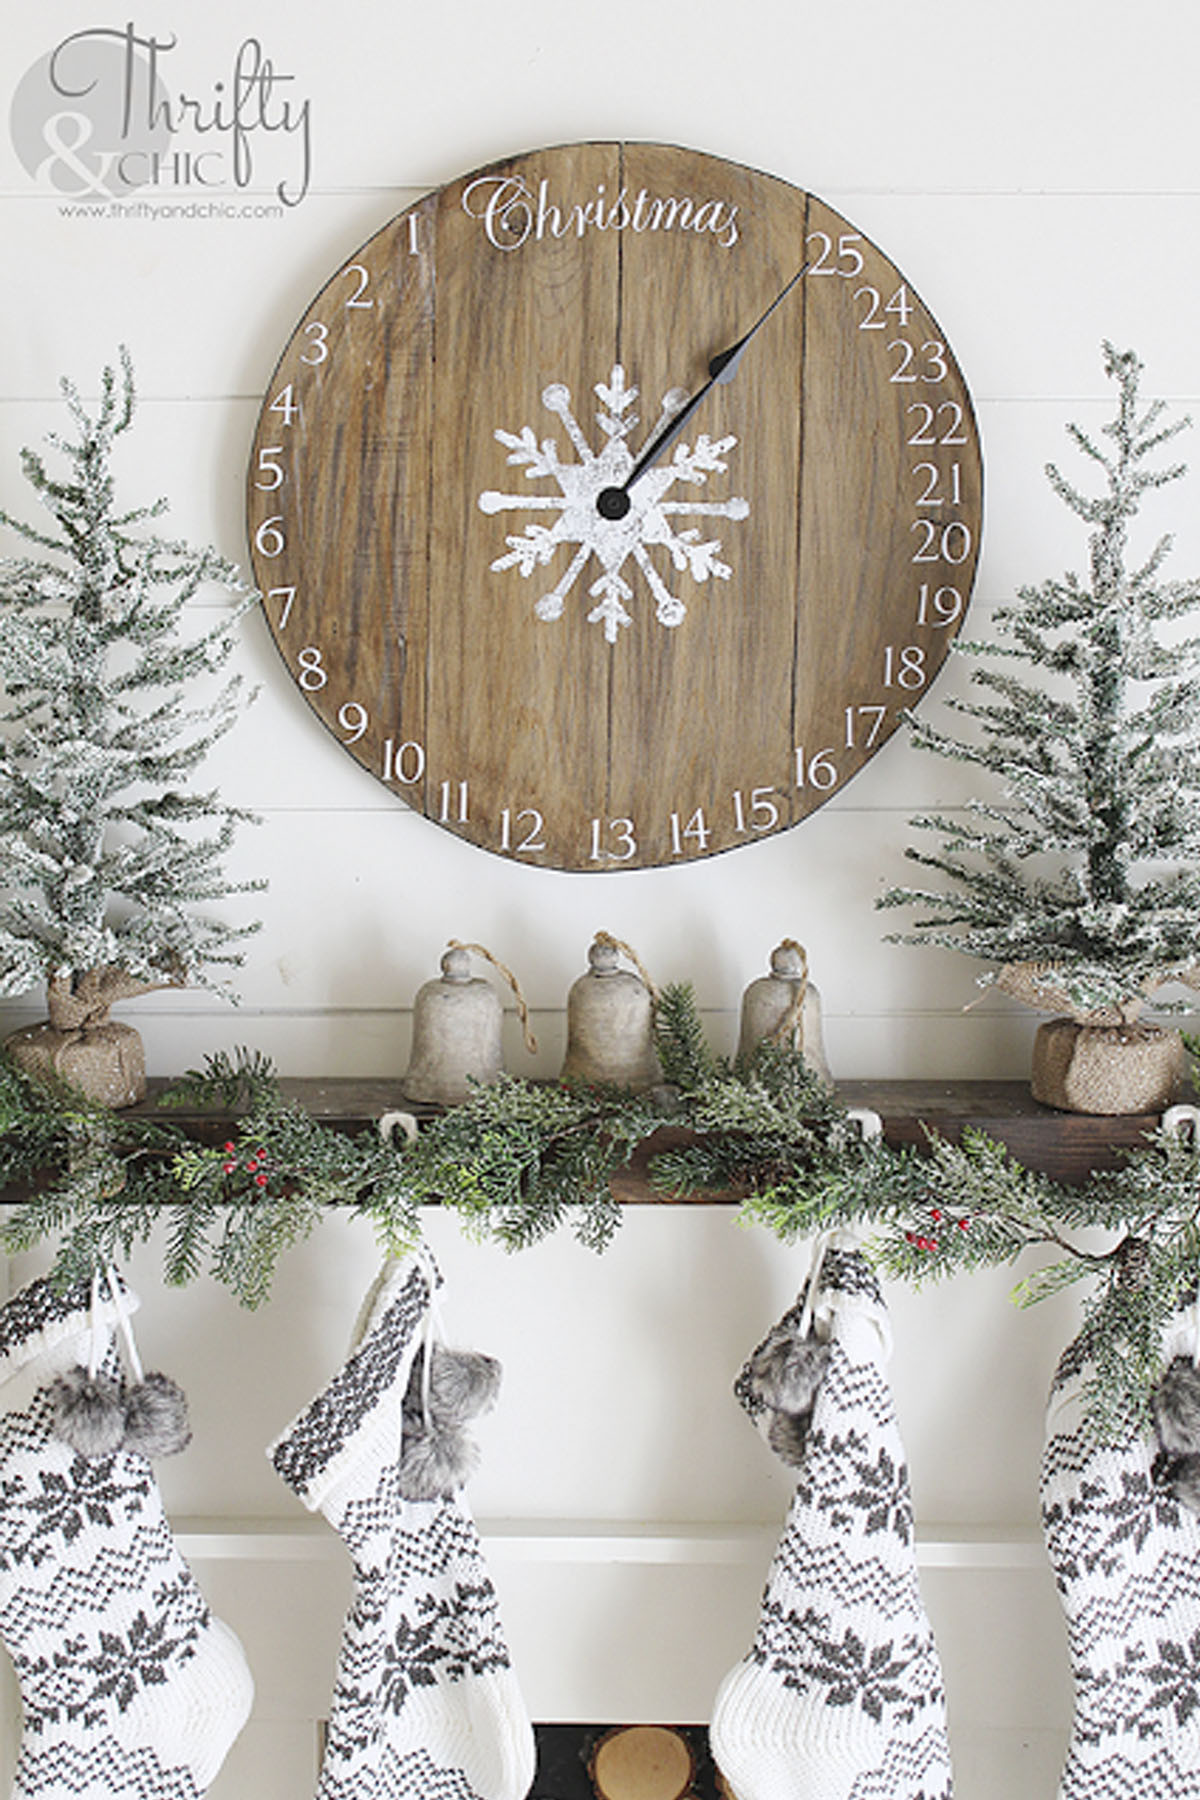 DIY Holiday Decorating
 43 Easy DIY Christmas Decorations Homemade Ideas for